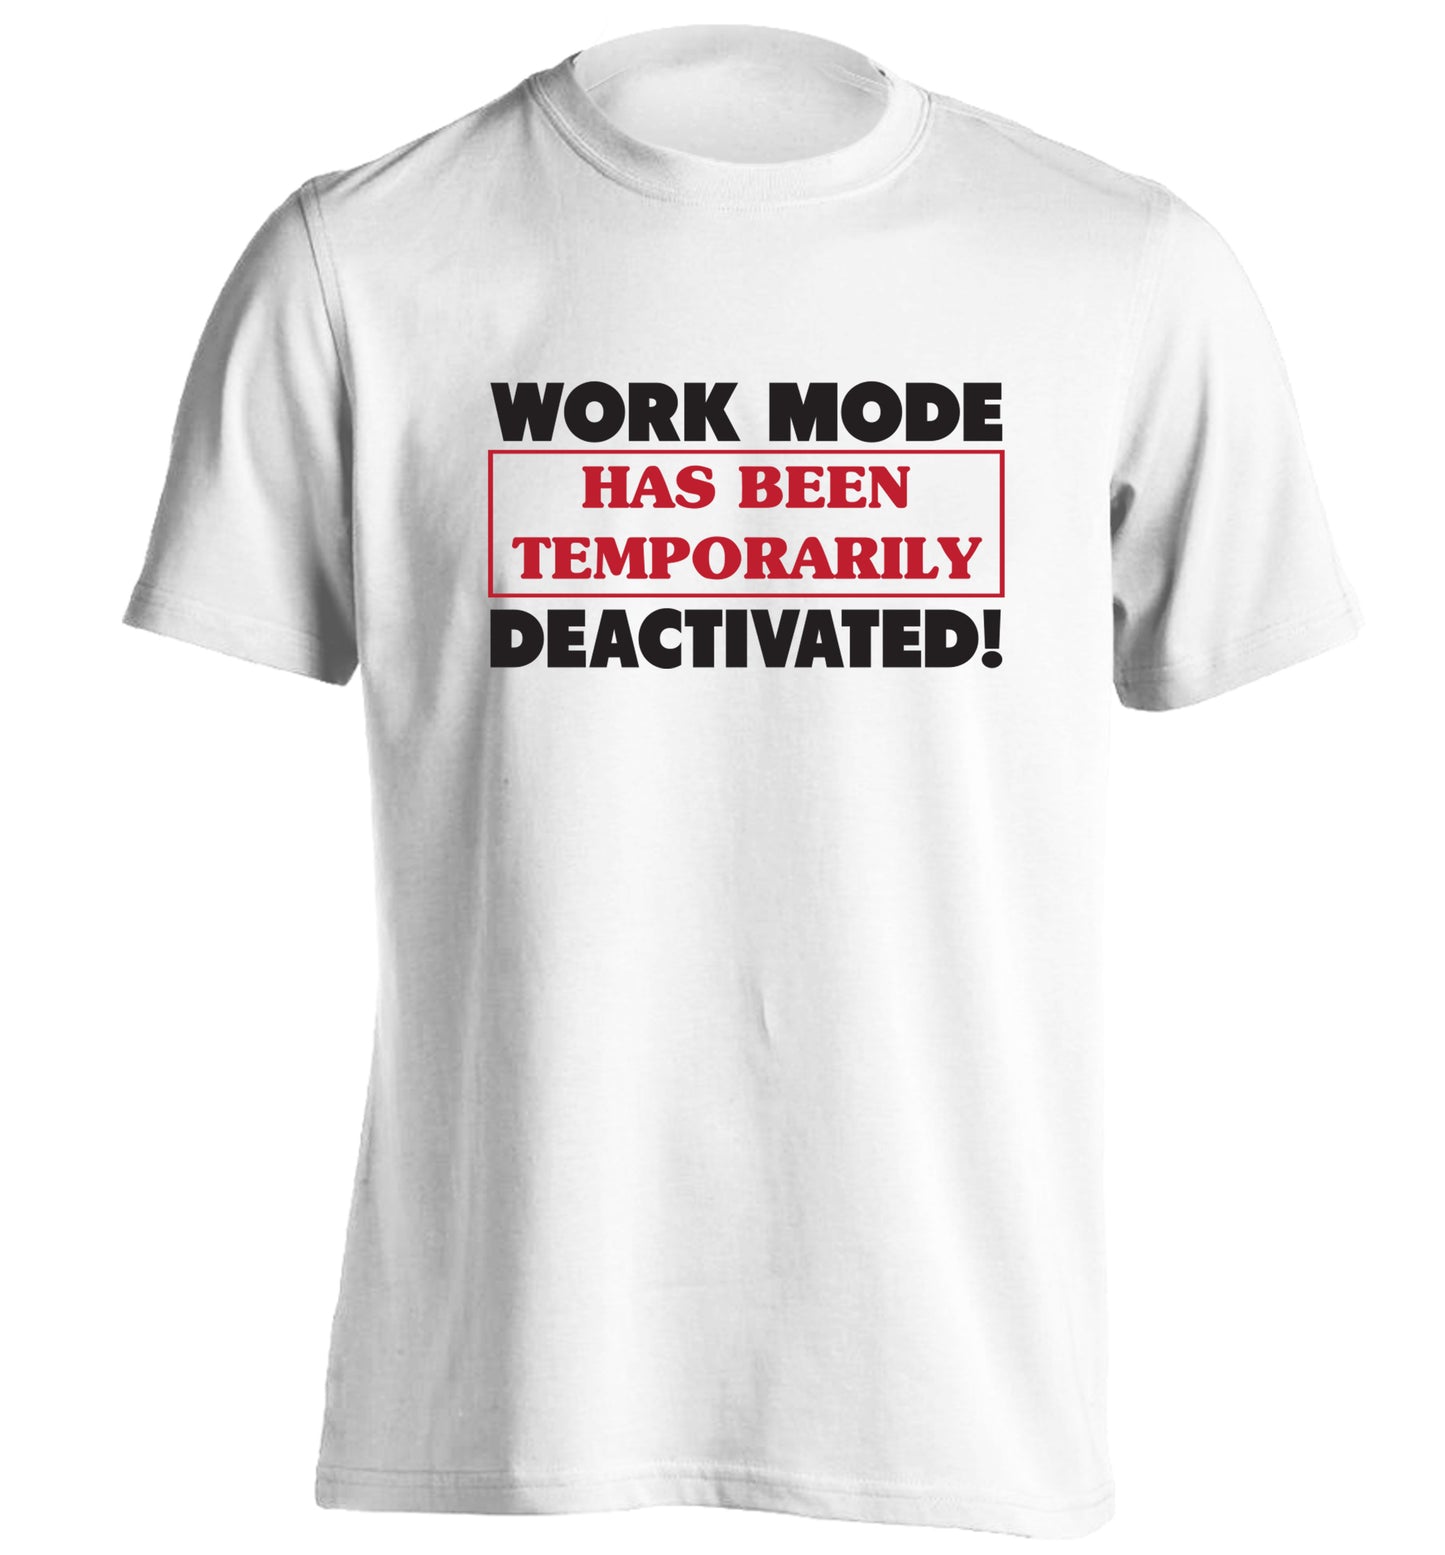 Work mode has now been temporarily deactivated adults unisex white Tshirt 2XL